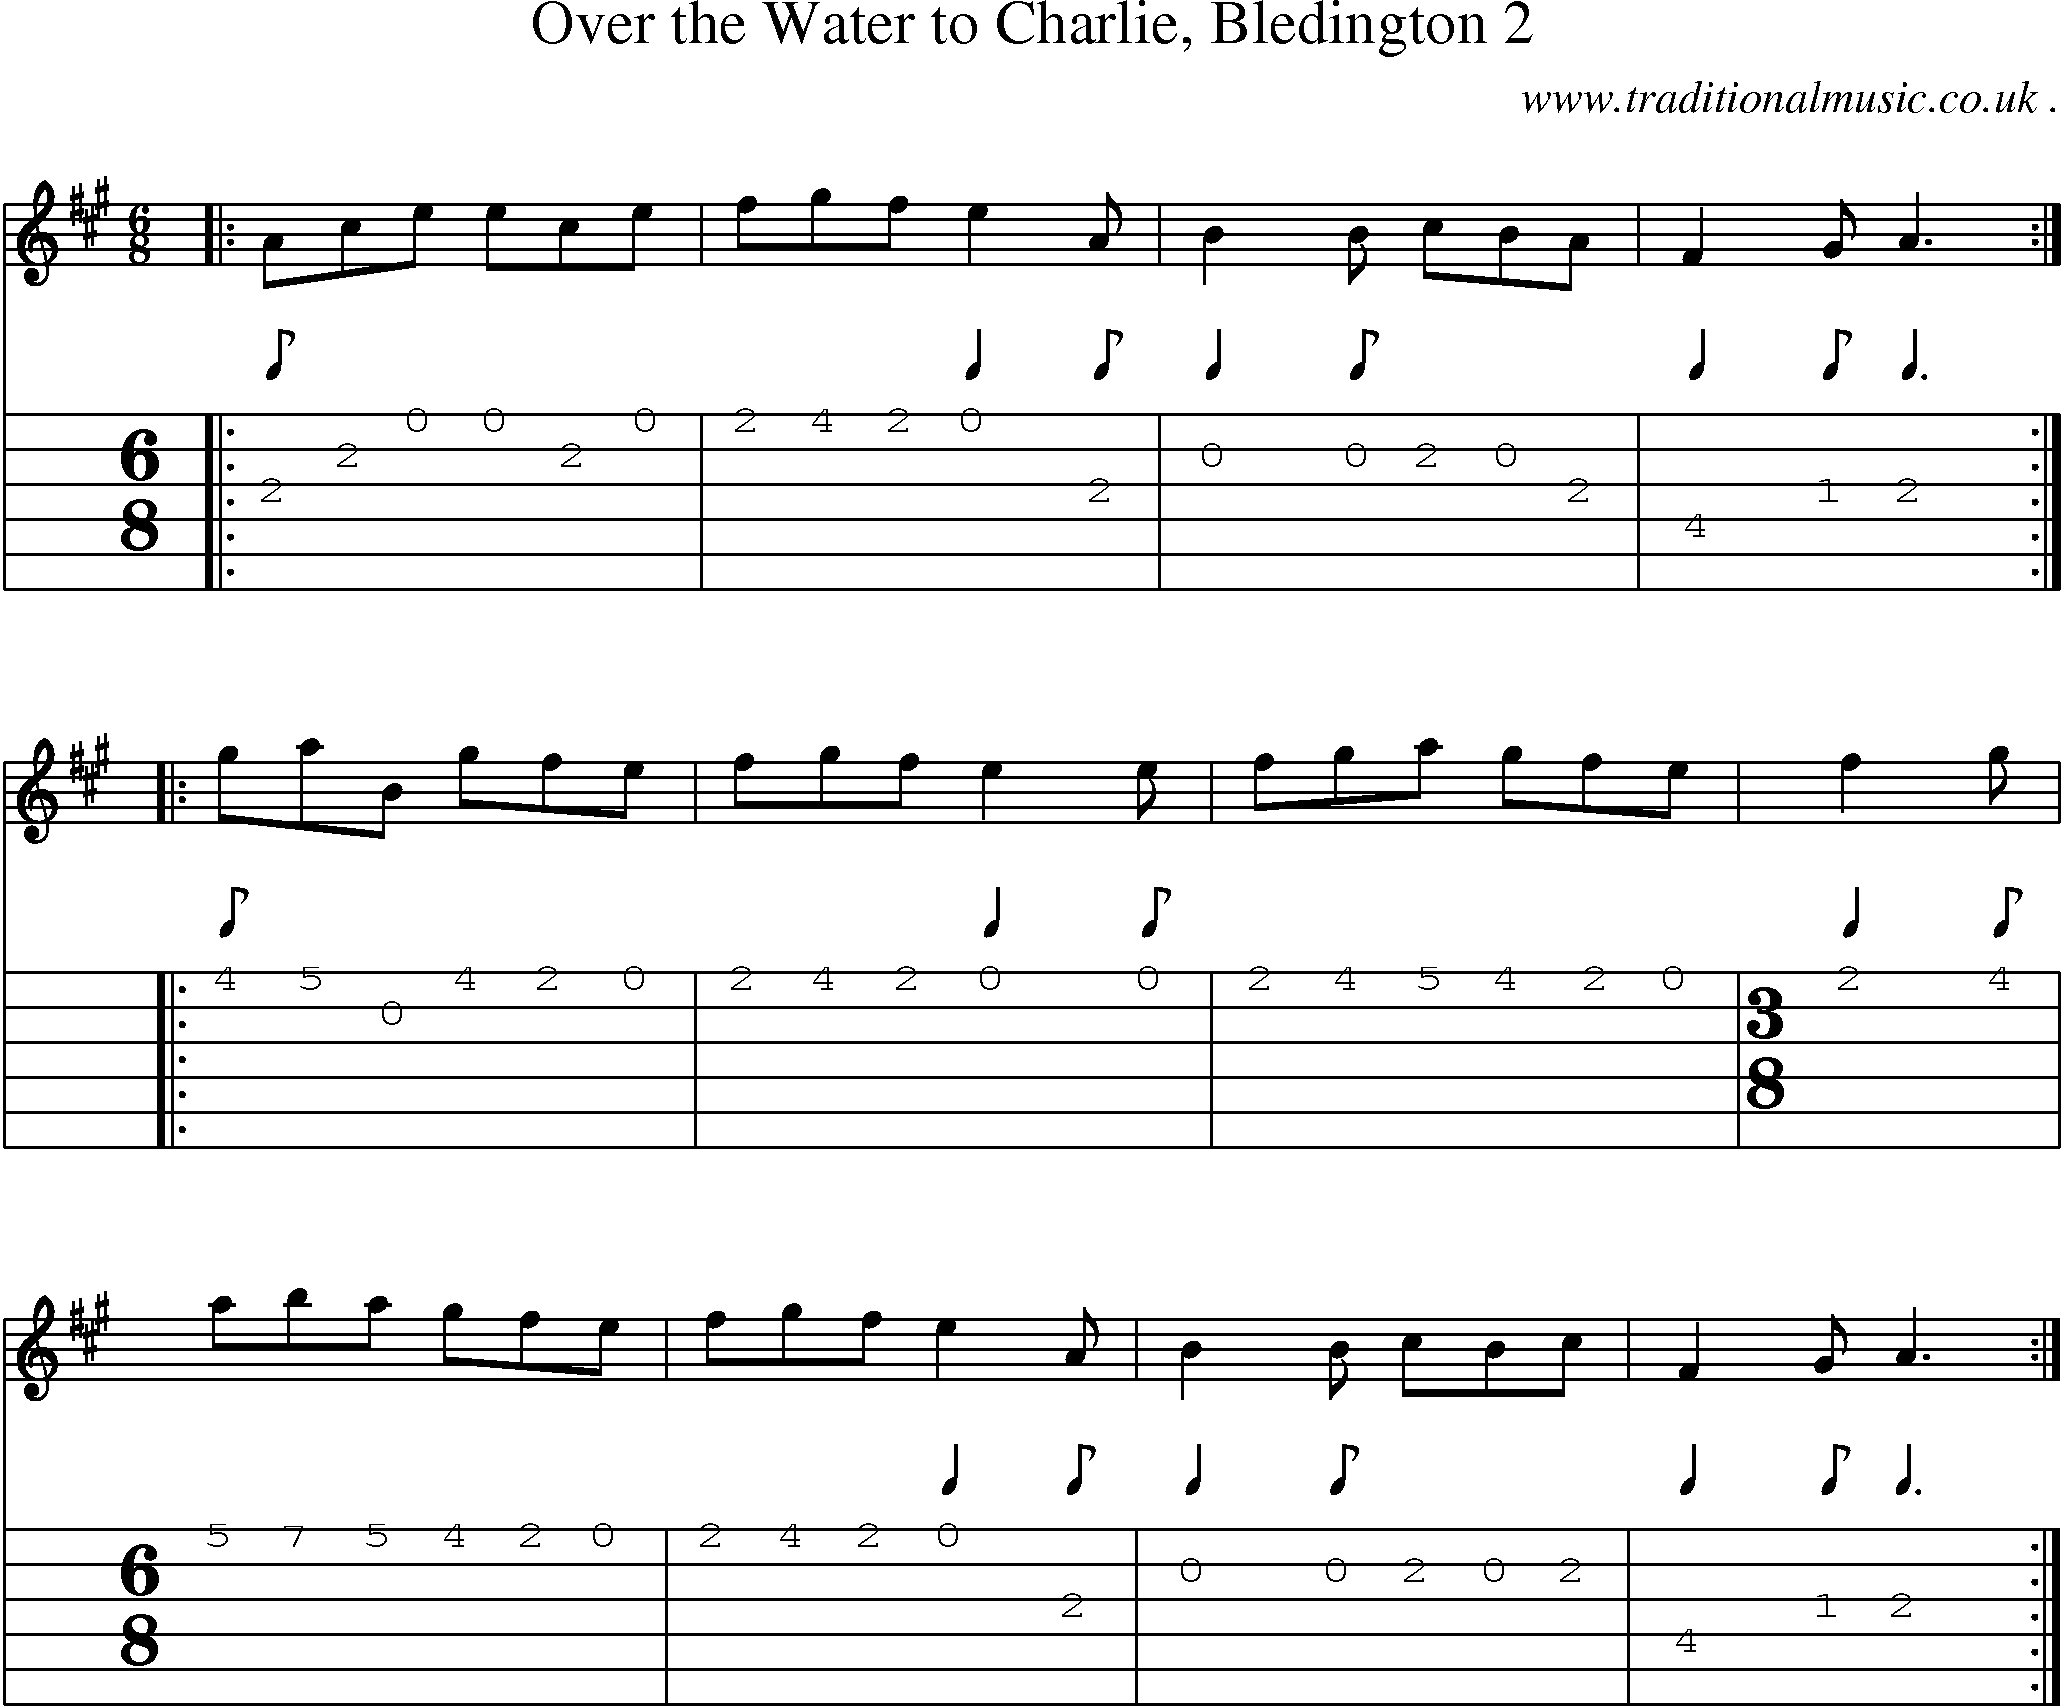 Sheet-Music and Guitar Tabs for Over The Water To Charlie Bledington 2